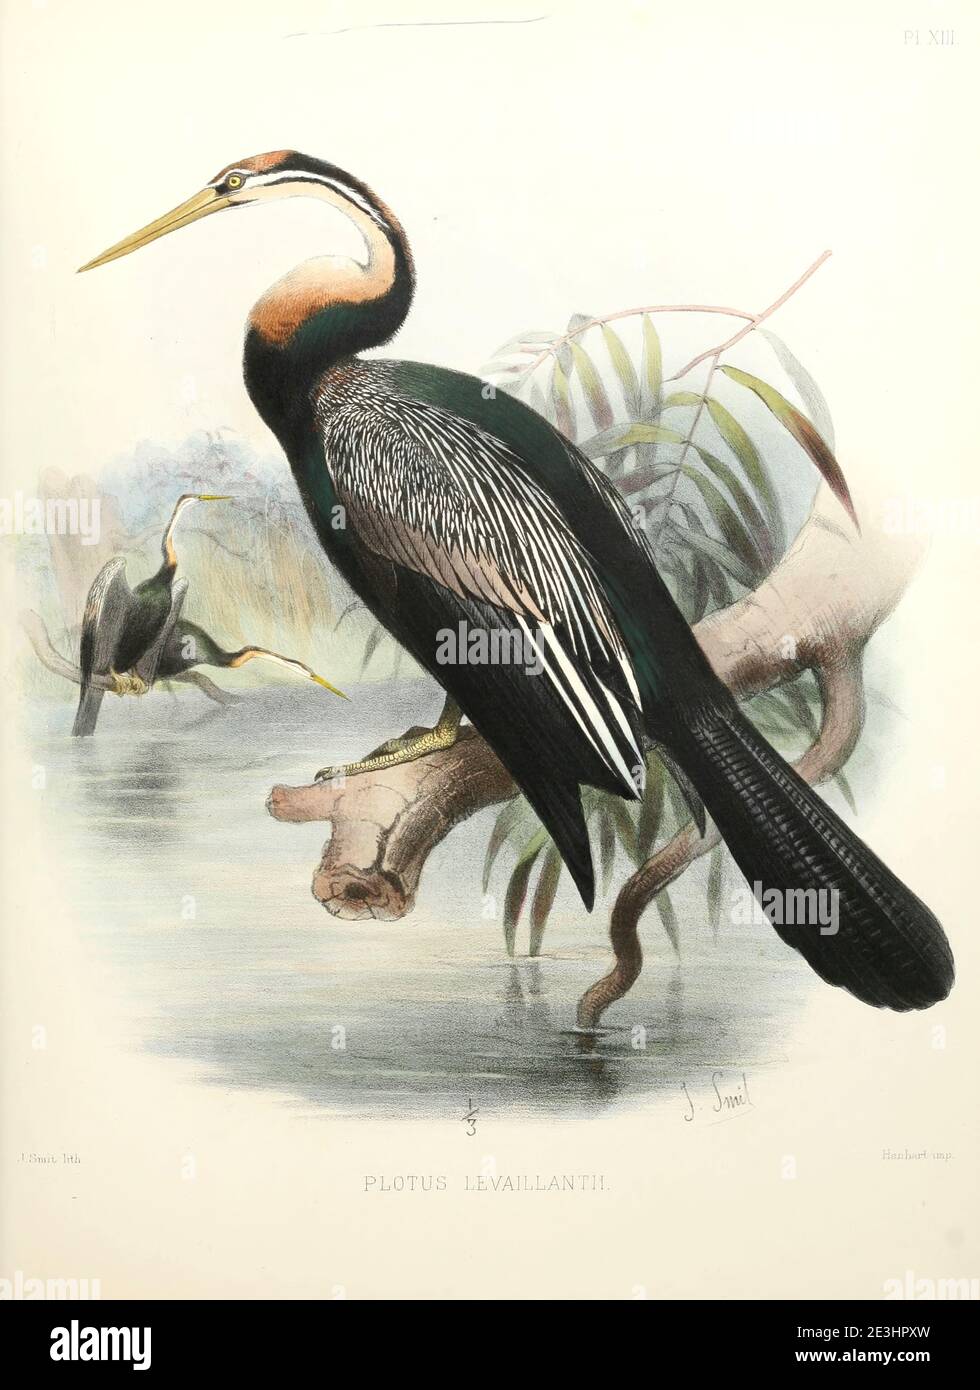 The African darter (Anhinga rufa [Here as Plotus levaillantii]), sometimes called the snakebird, is a water bird of sub-Saharan Africa and Iraq. From the survey of western Palestine. The fauna and flora of Palestine by Tristram, H. B. (Henry Baker), 1822-1906 Published by The Committee of the Palestine Exploration Fund, London, 1884 Stock Photo